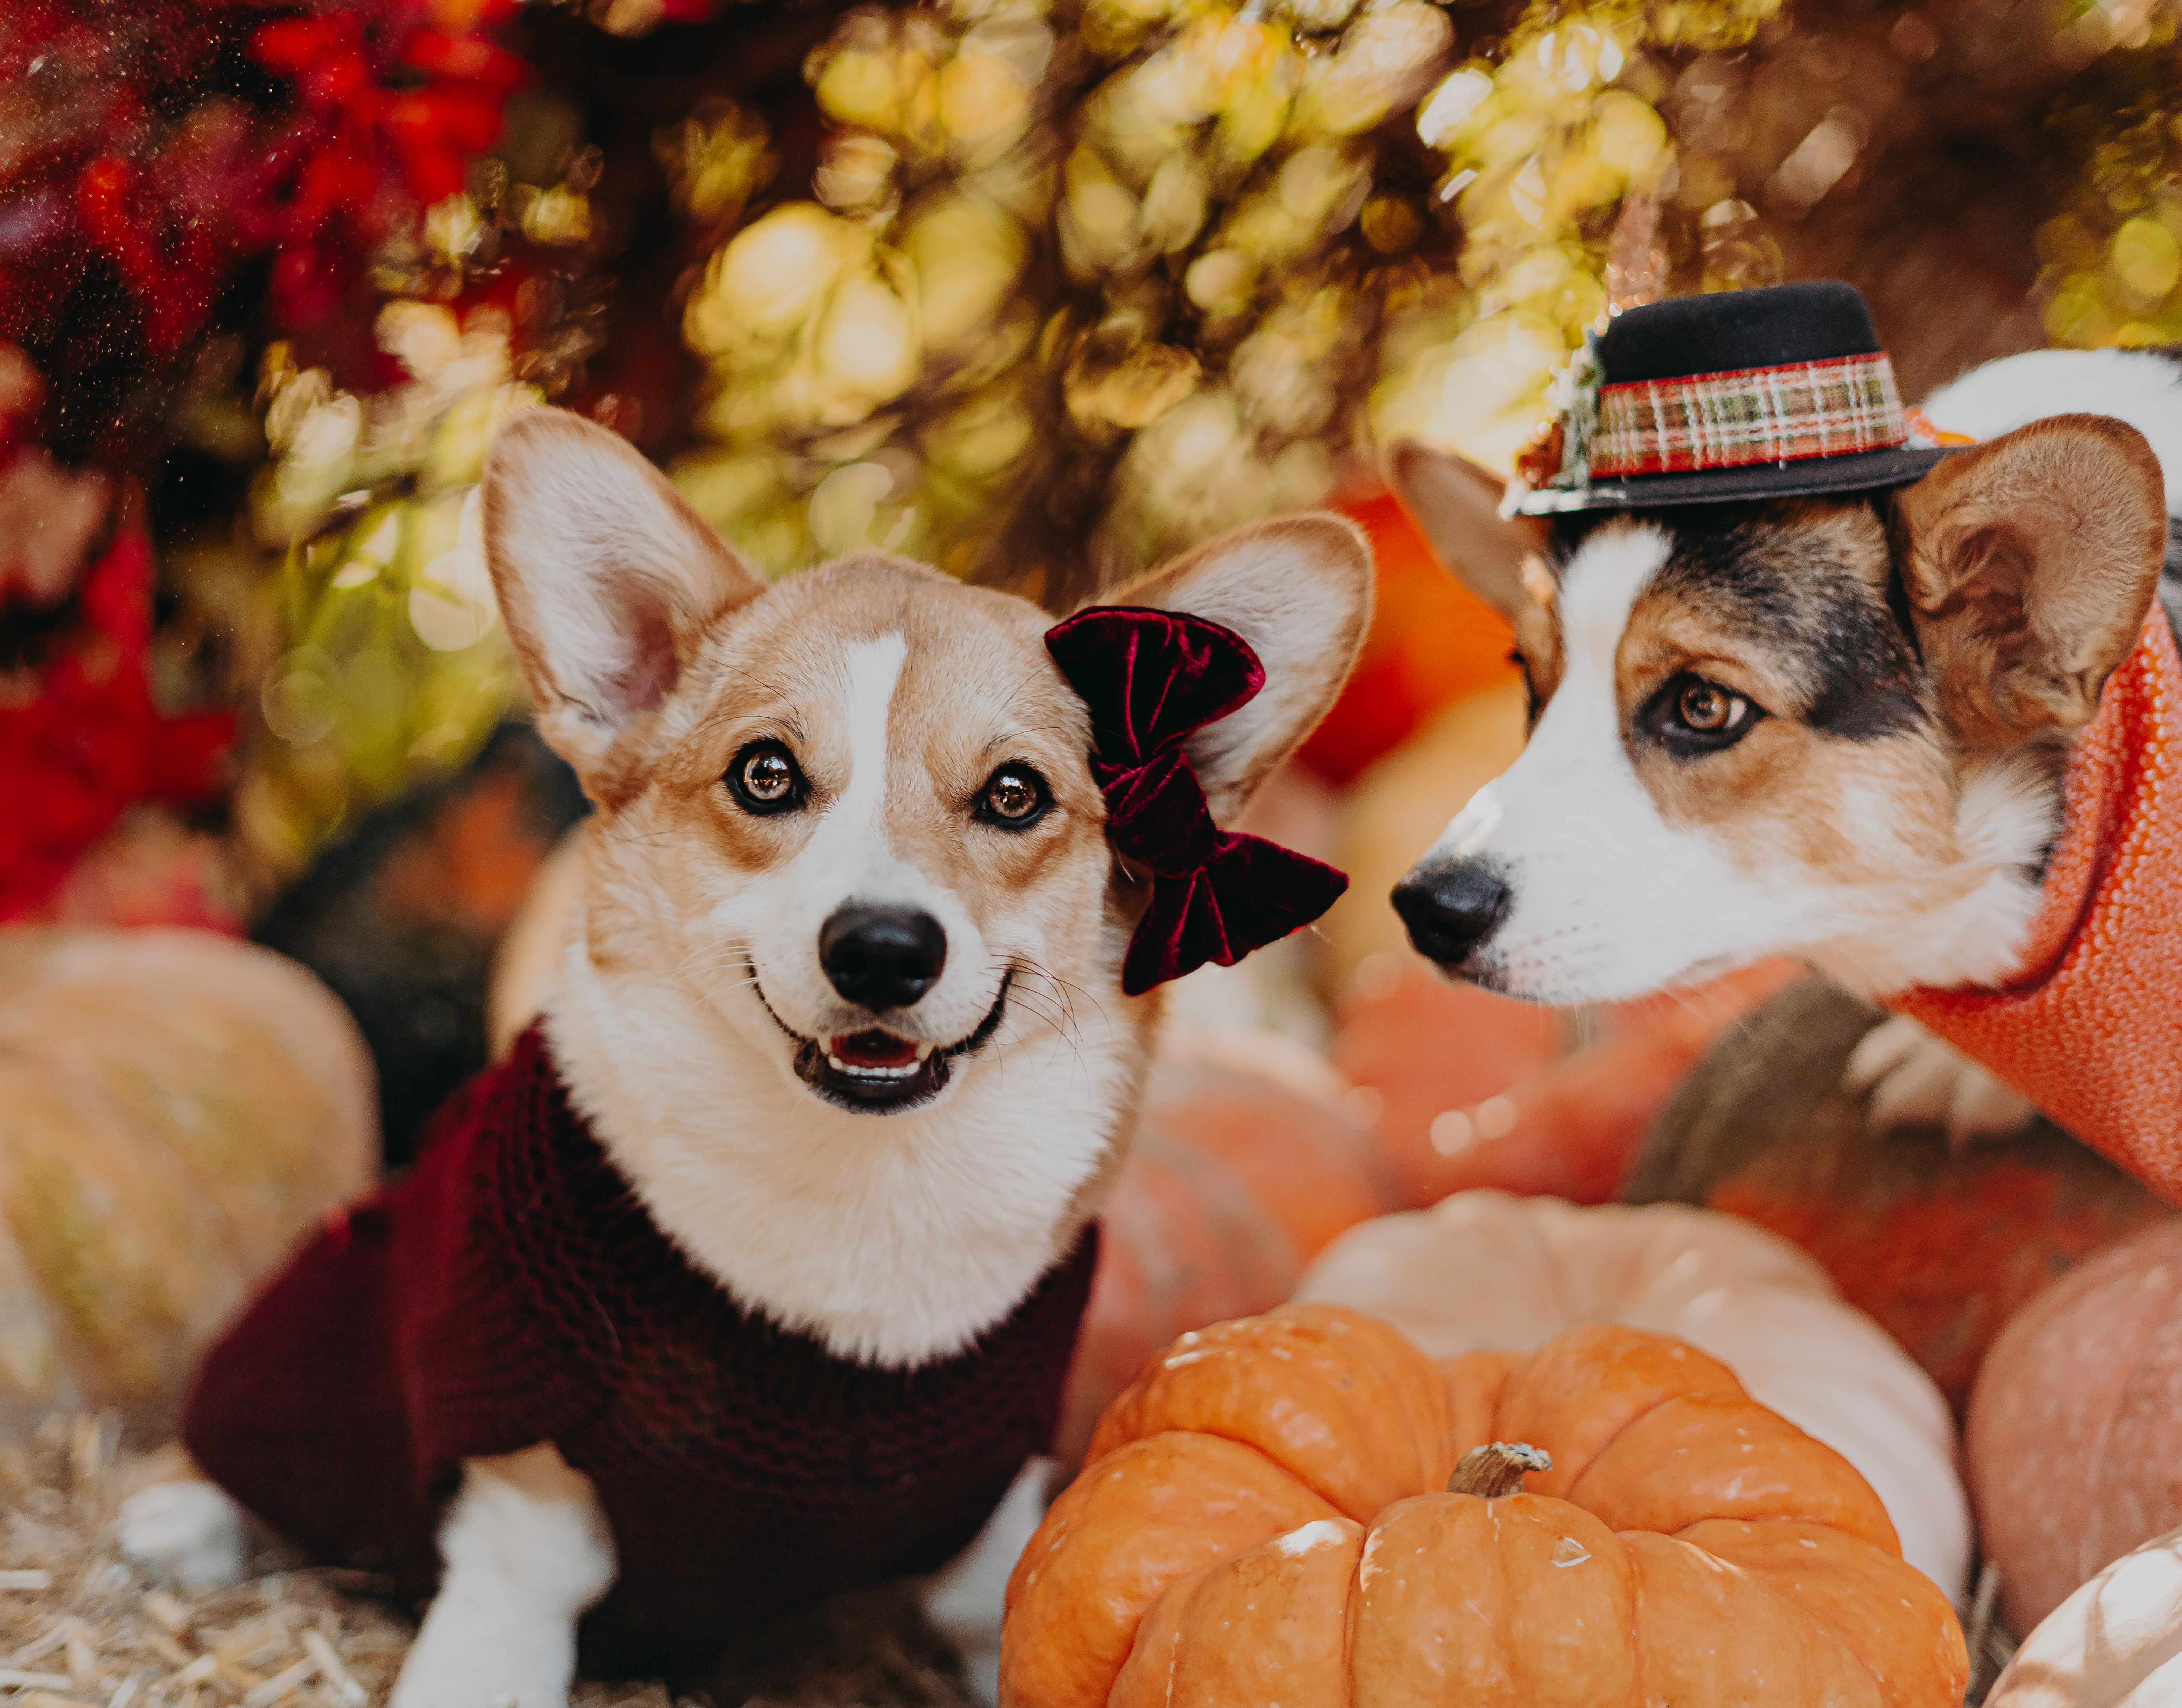 two corgis wearing outfits and posing with pumpkins